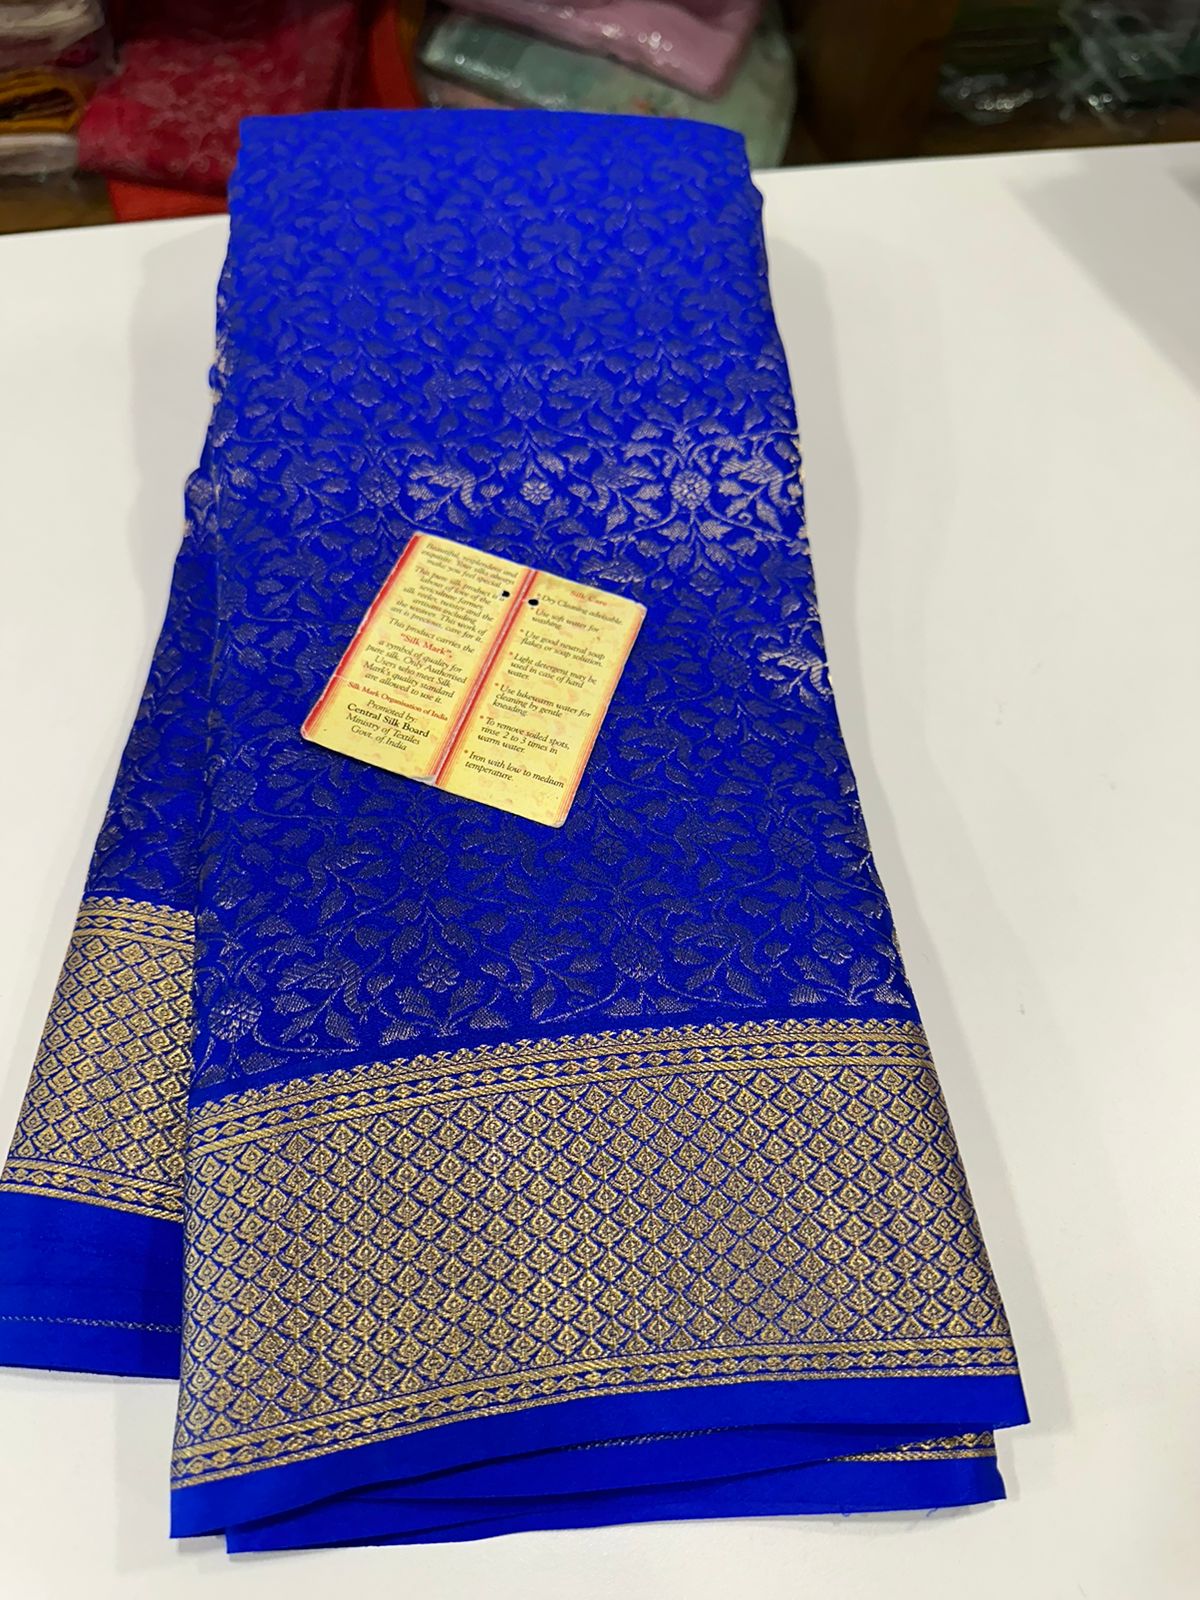 Pure brocade Mysore silk sarees with 120 grm thickness with rich pallu and zari weaving allover saree with plain blouse